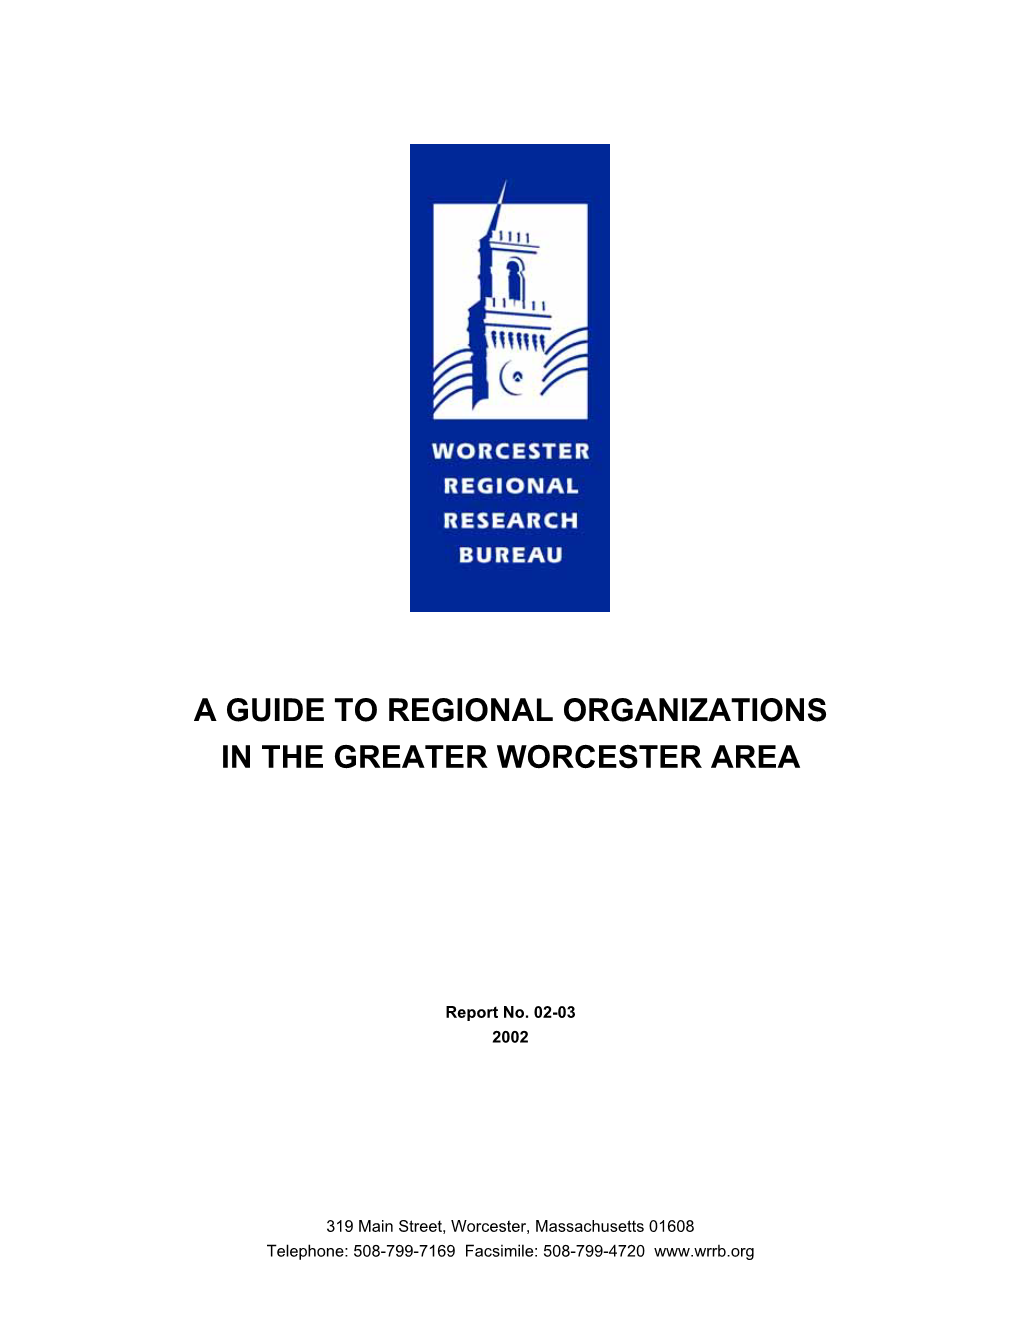 A Guide to Regional Organizations in the Greater Worcester Area